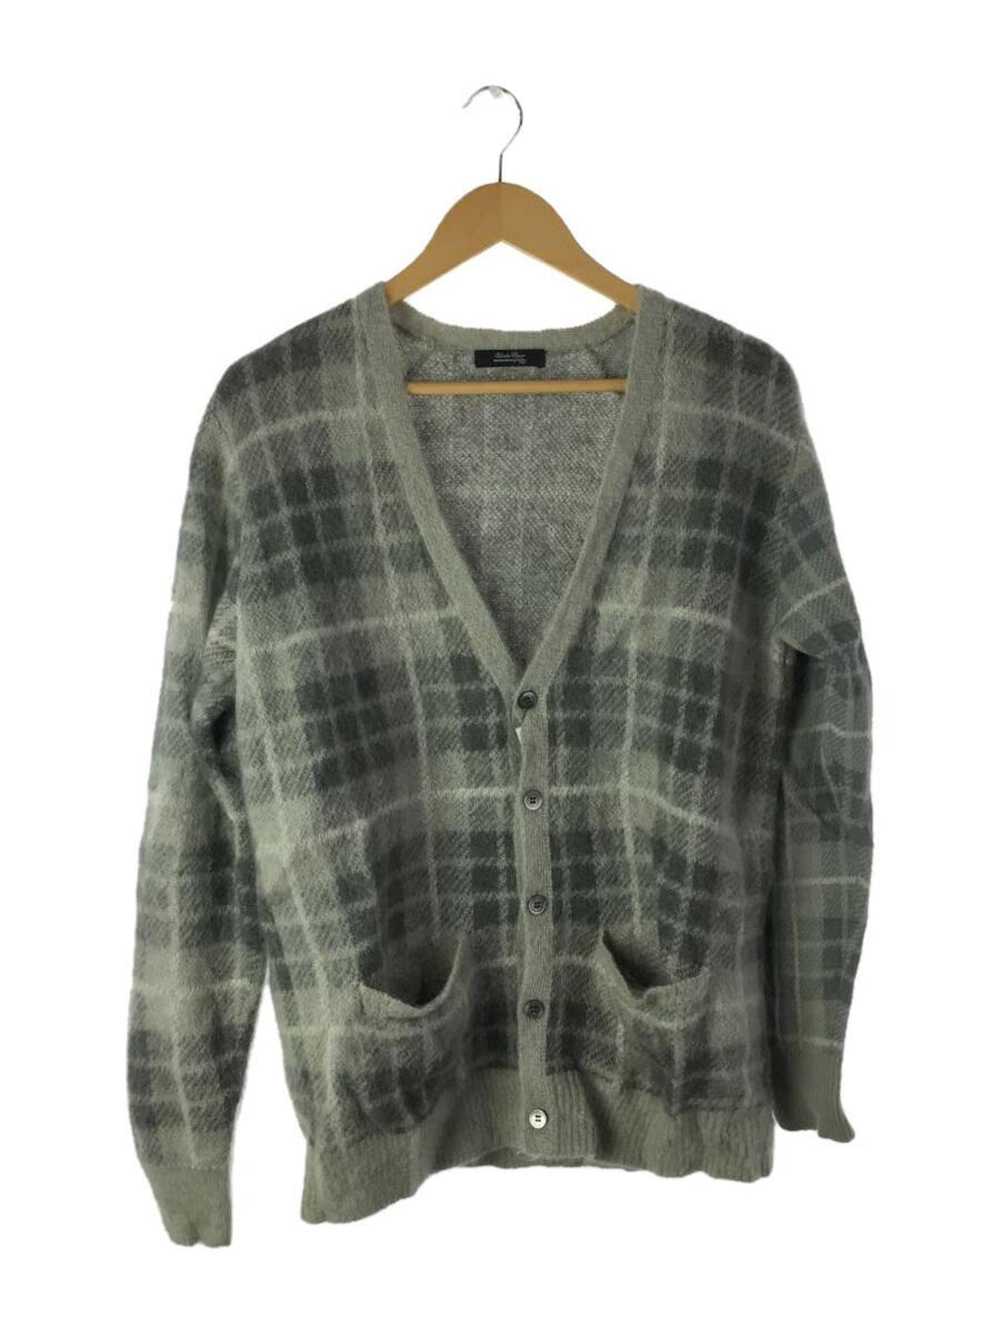 Undercover Thick Mohair Raglan Knit Cardigan - image 1